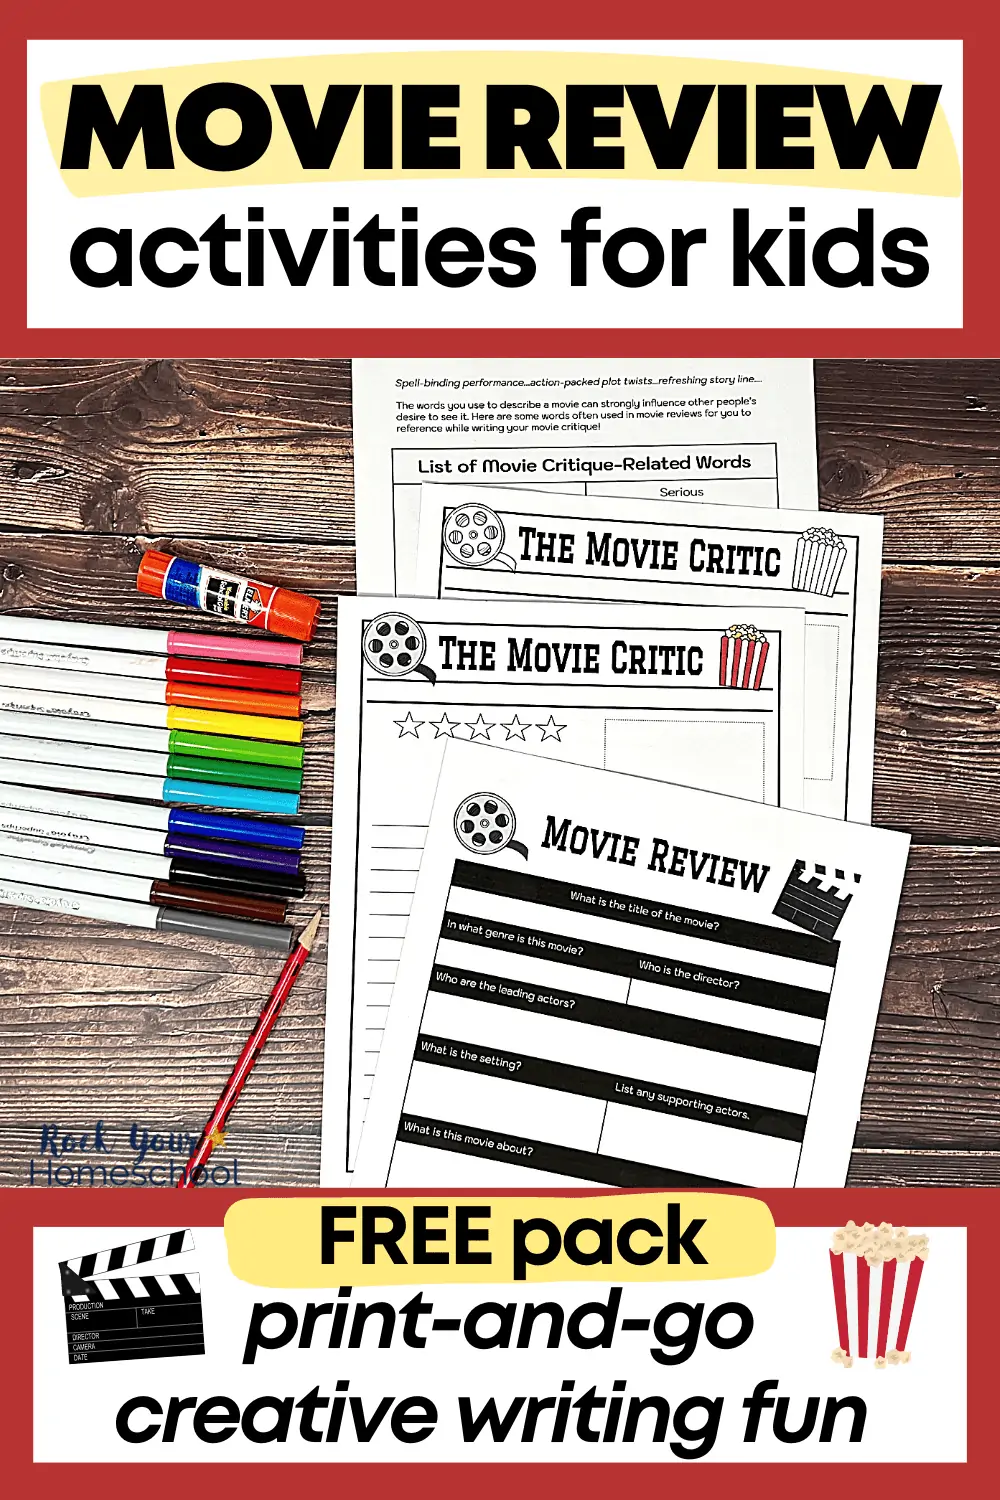 Writing Fun Activities for Kids: Free Printable Movie Review Template (5 Pages)